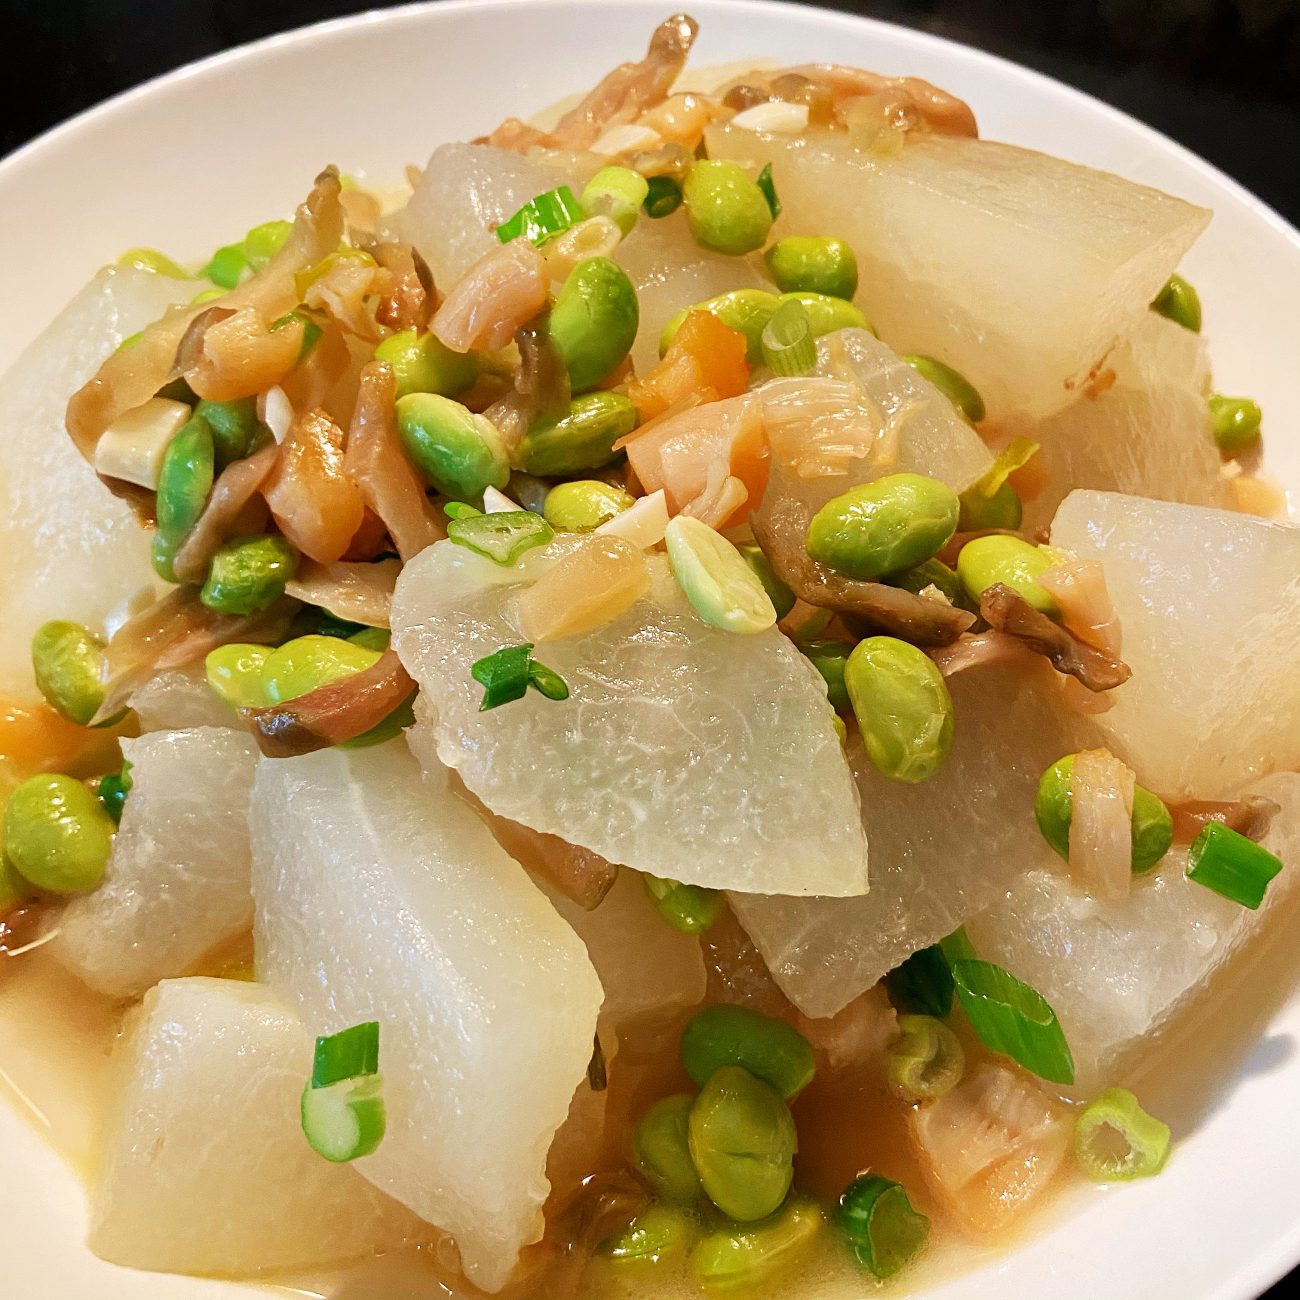 Winter melon braised with soy bean and dried baby scallops